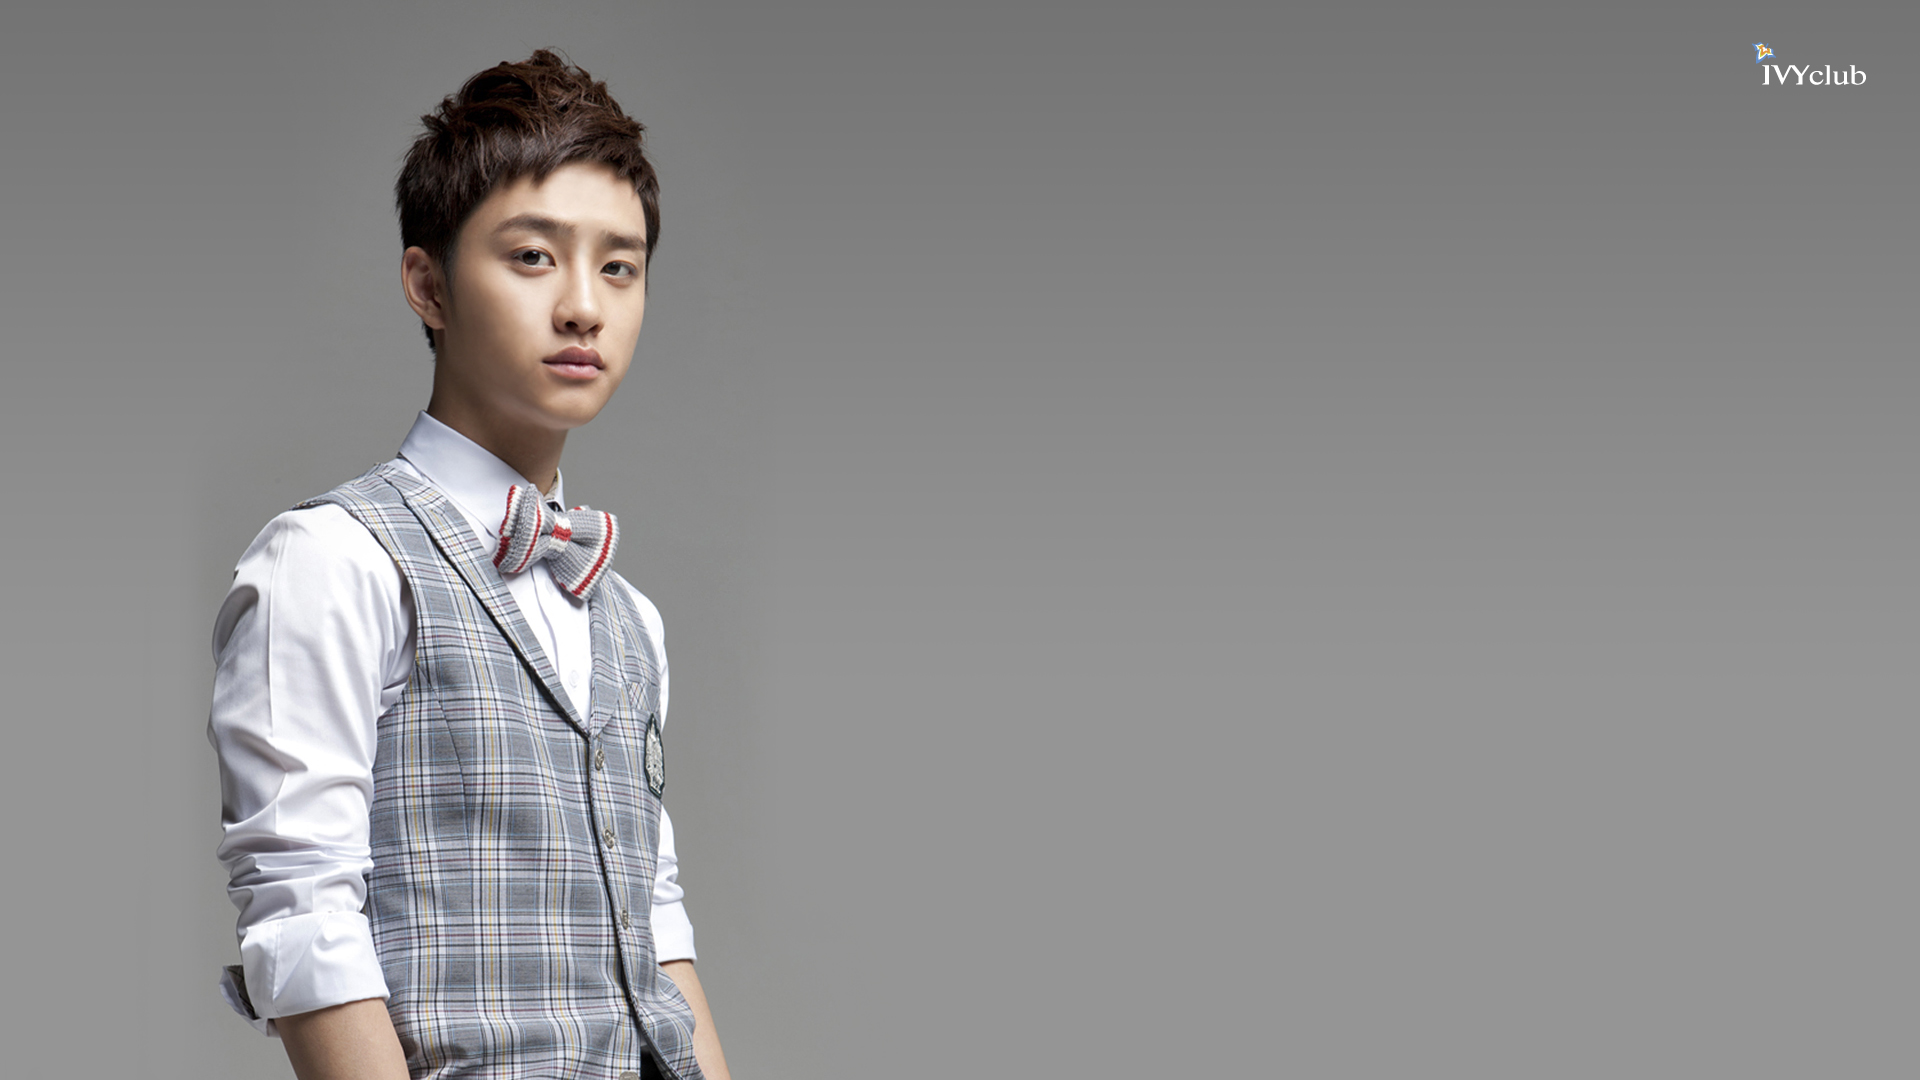  Exo  Wallpapers  Pictures Images